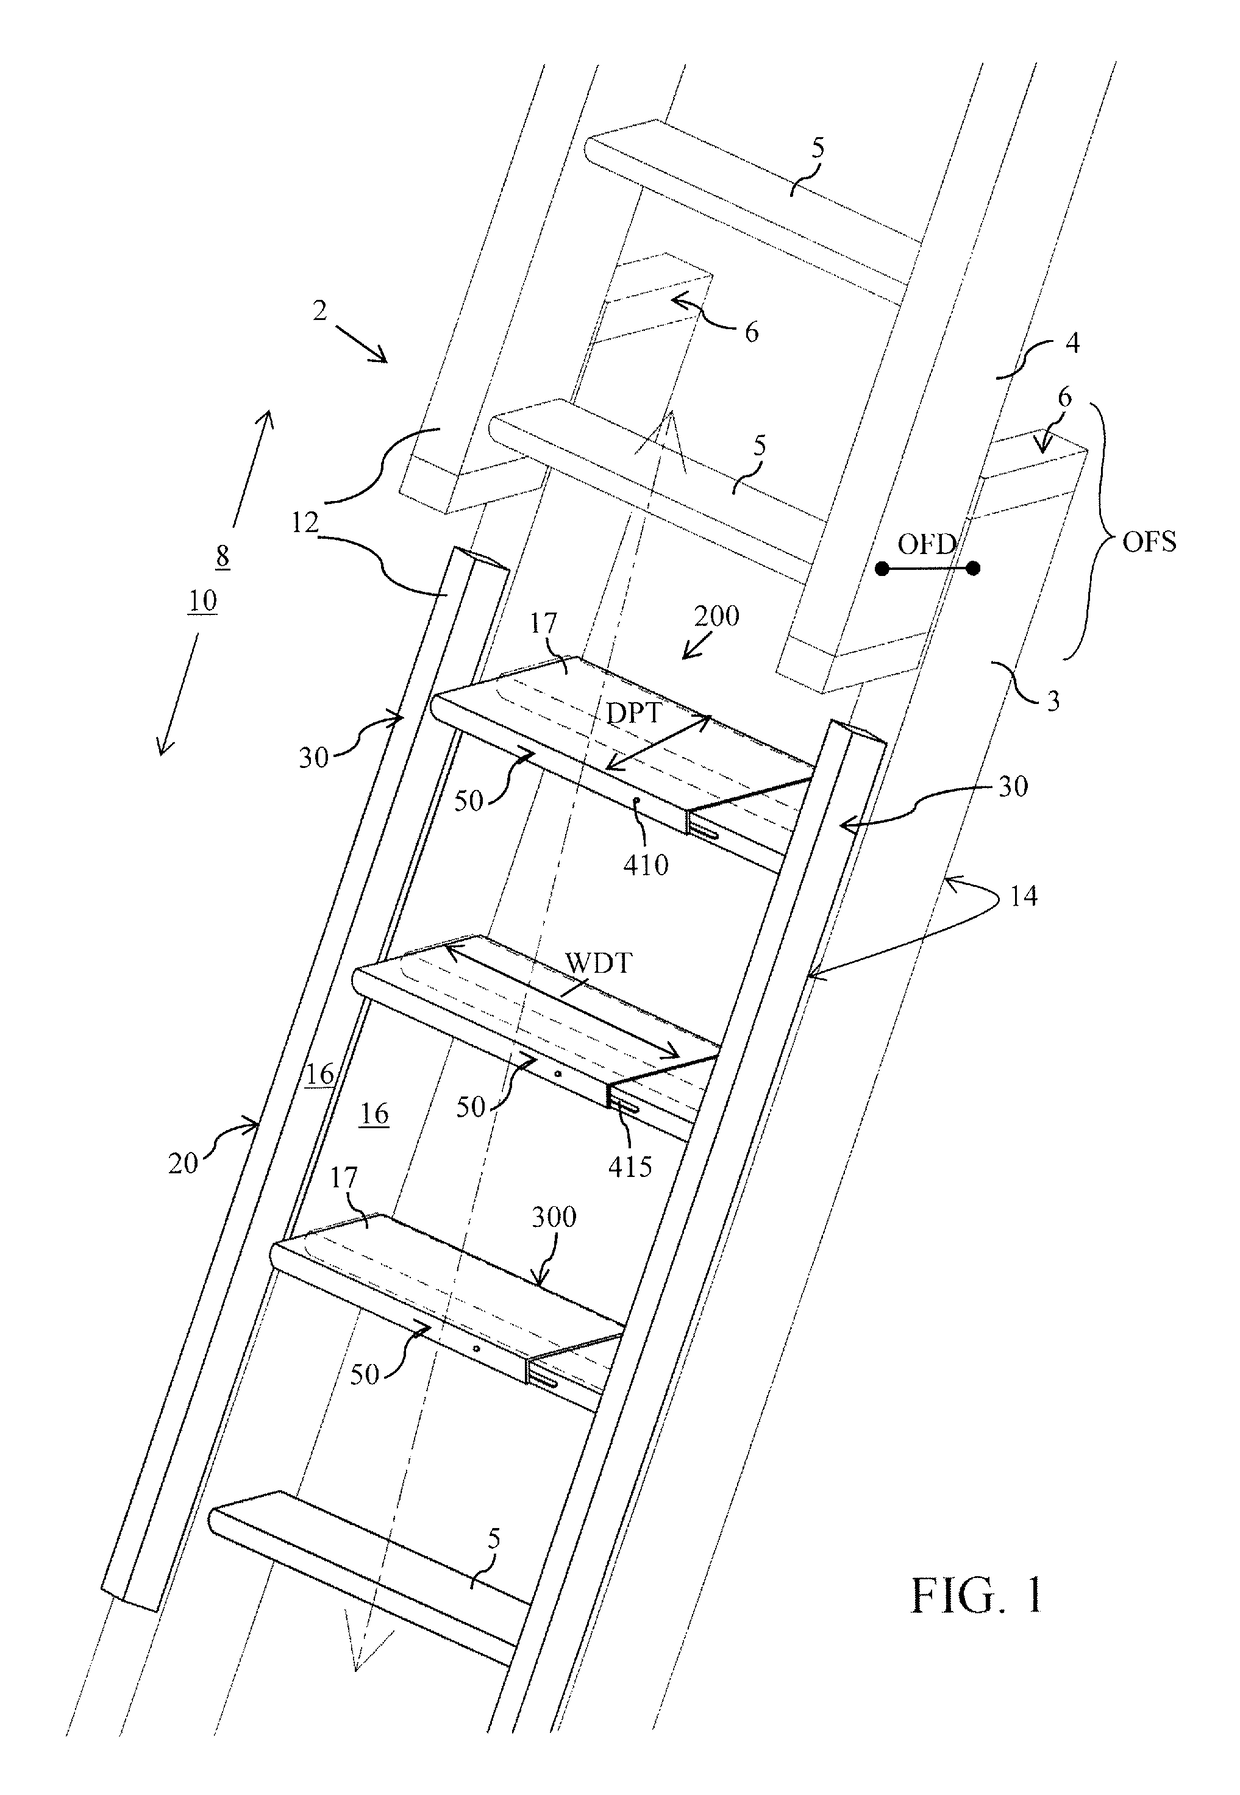 Step adaptor for transitioning between sections of an extension ladder